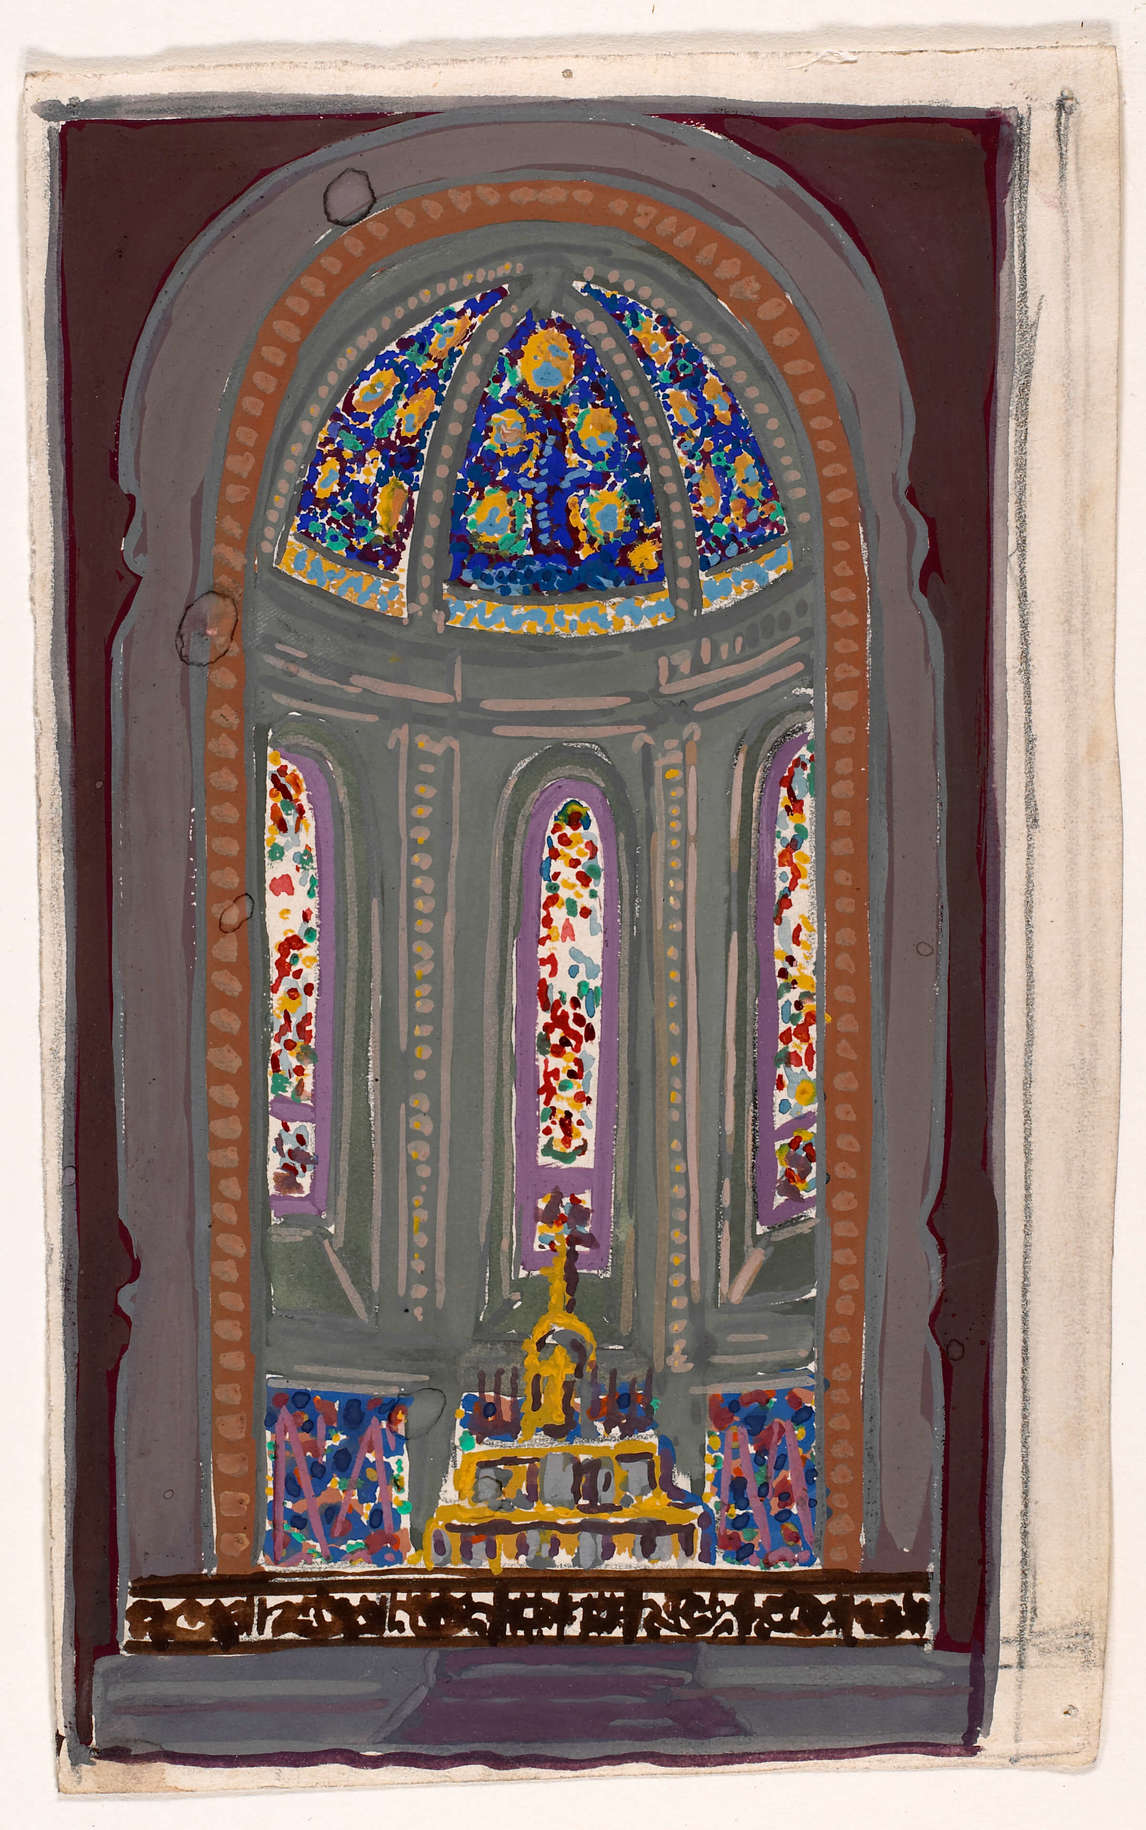 Art Canada Institute, Paul-Émile Borduas, Decorative Project for the Chapel of a Château, No. 4: Study for Stained Glass Window, 1927